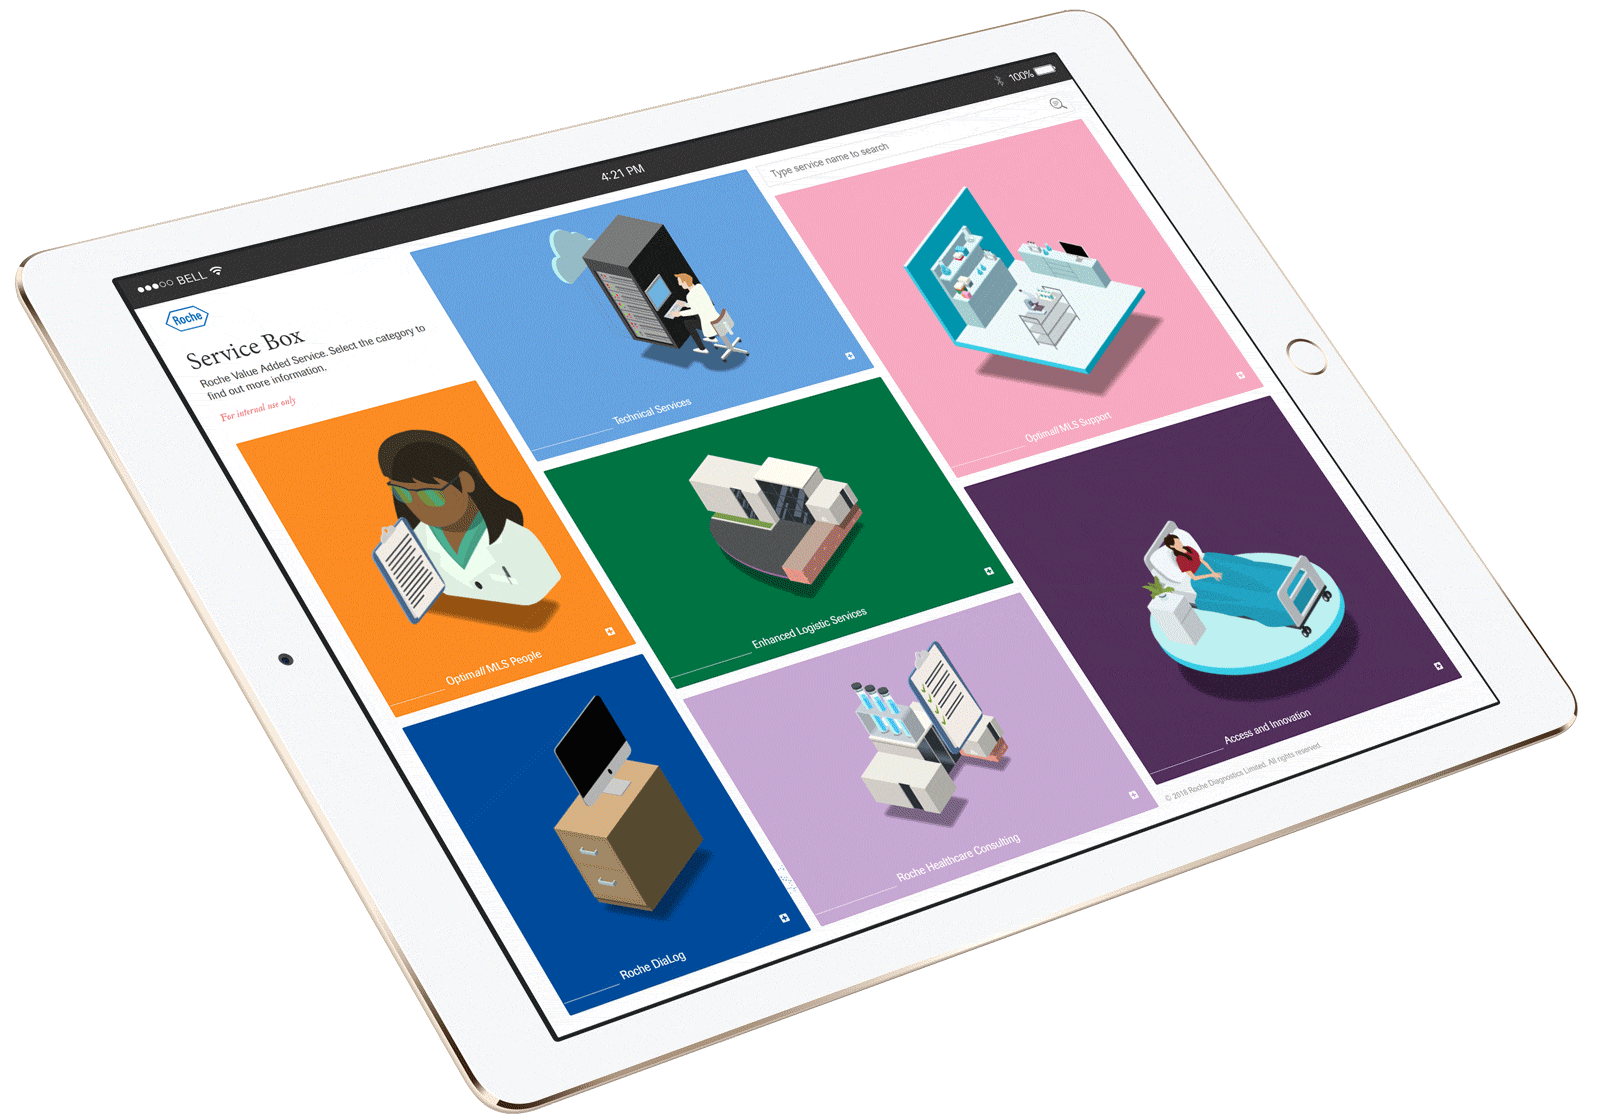 Black iPad displaying Roche interactive touchscreen presentation showing illustrations of hospital envrionment